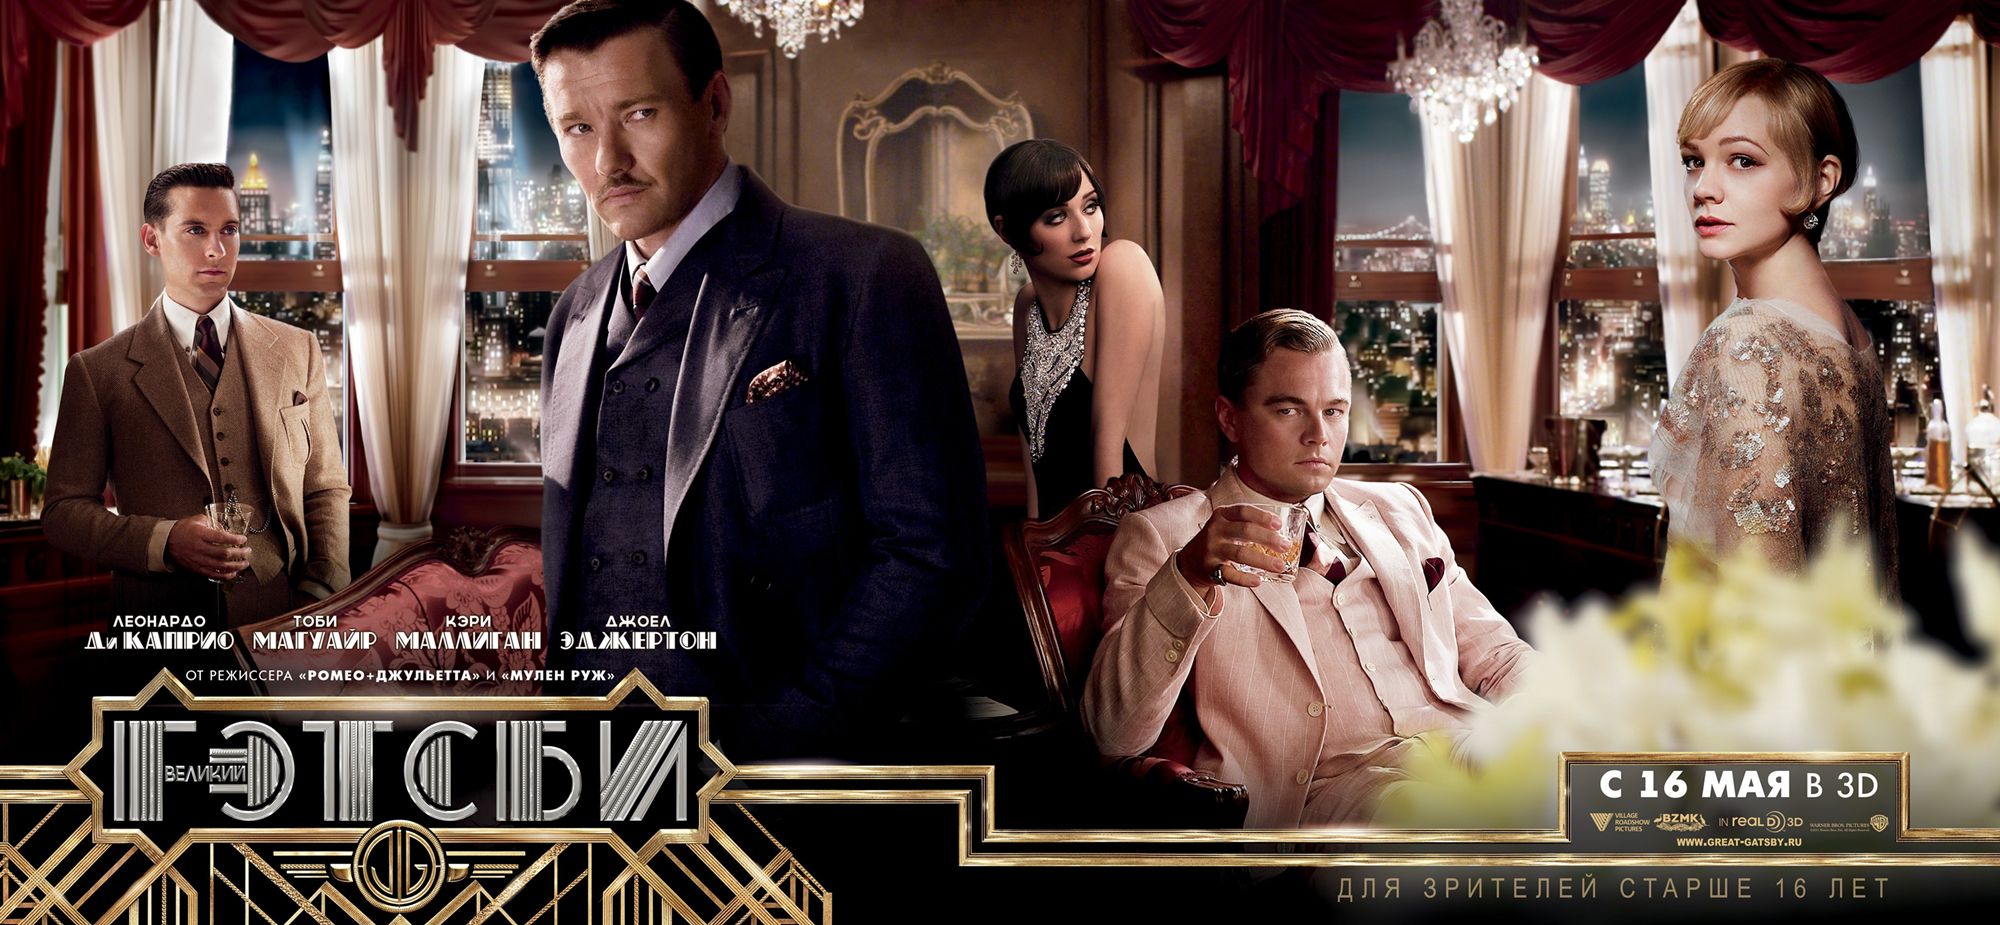 THE GREAT GATSBY International Poster 04